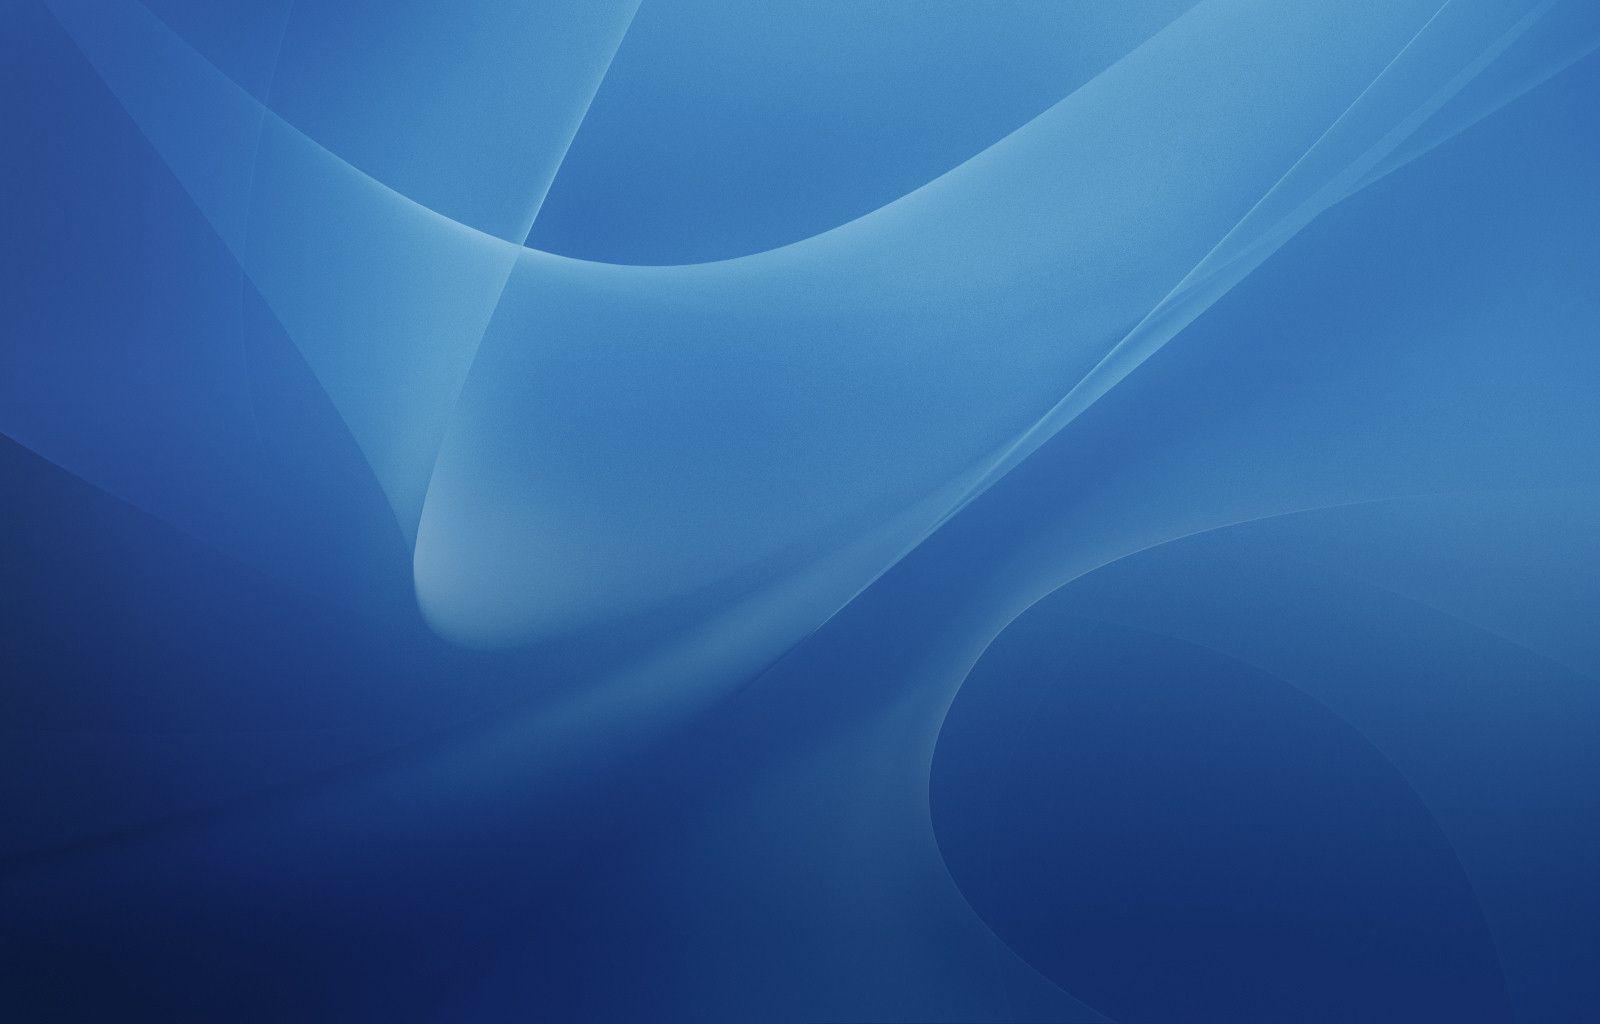 Mac OS X 10.0 to 10.8 Wallpaper and Intro Videos